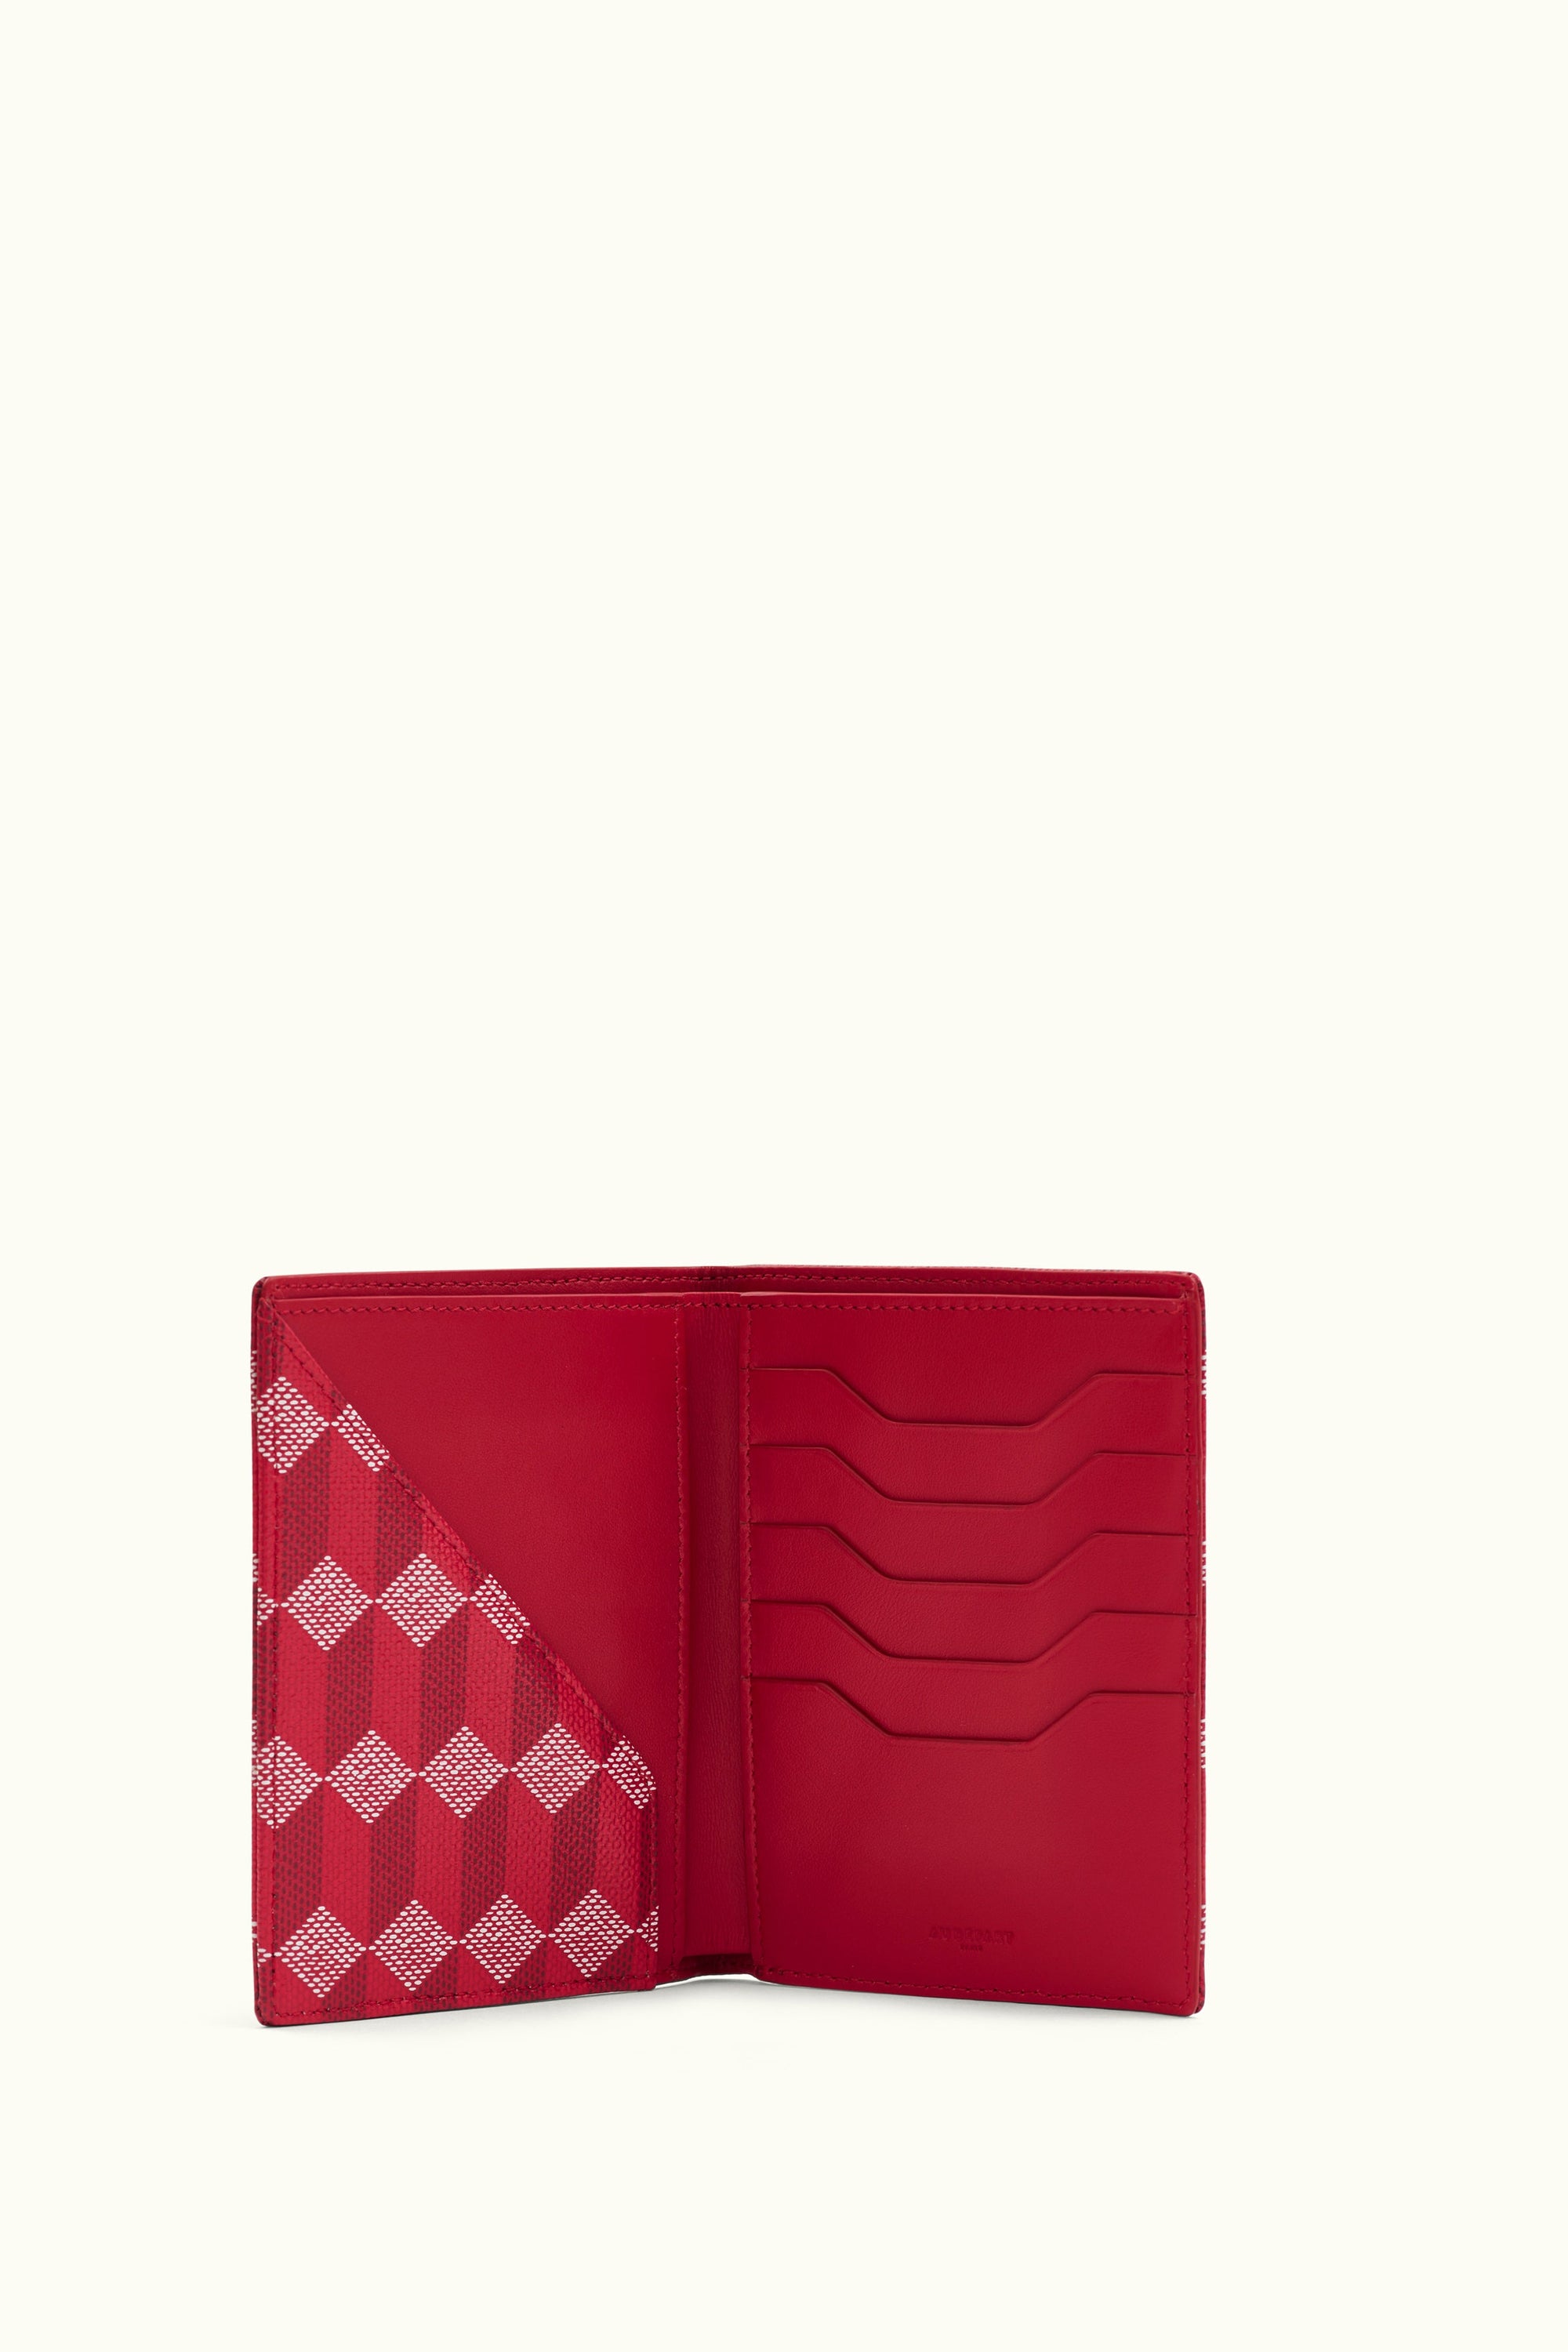 Le Porte-Passeport Coated Canvas Red